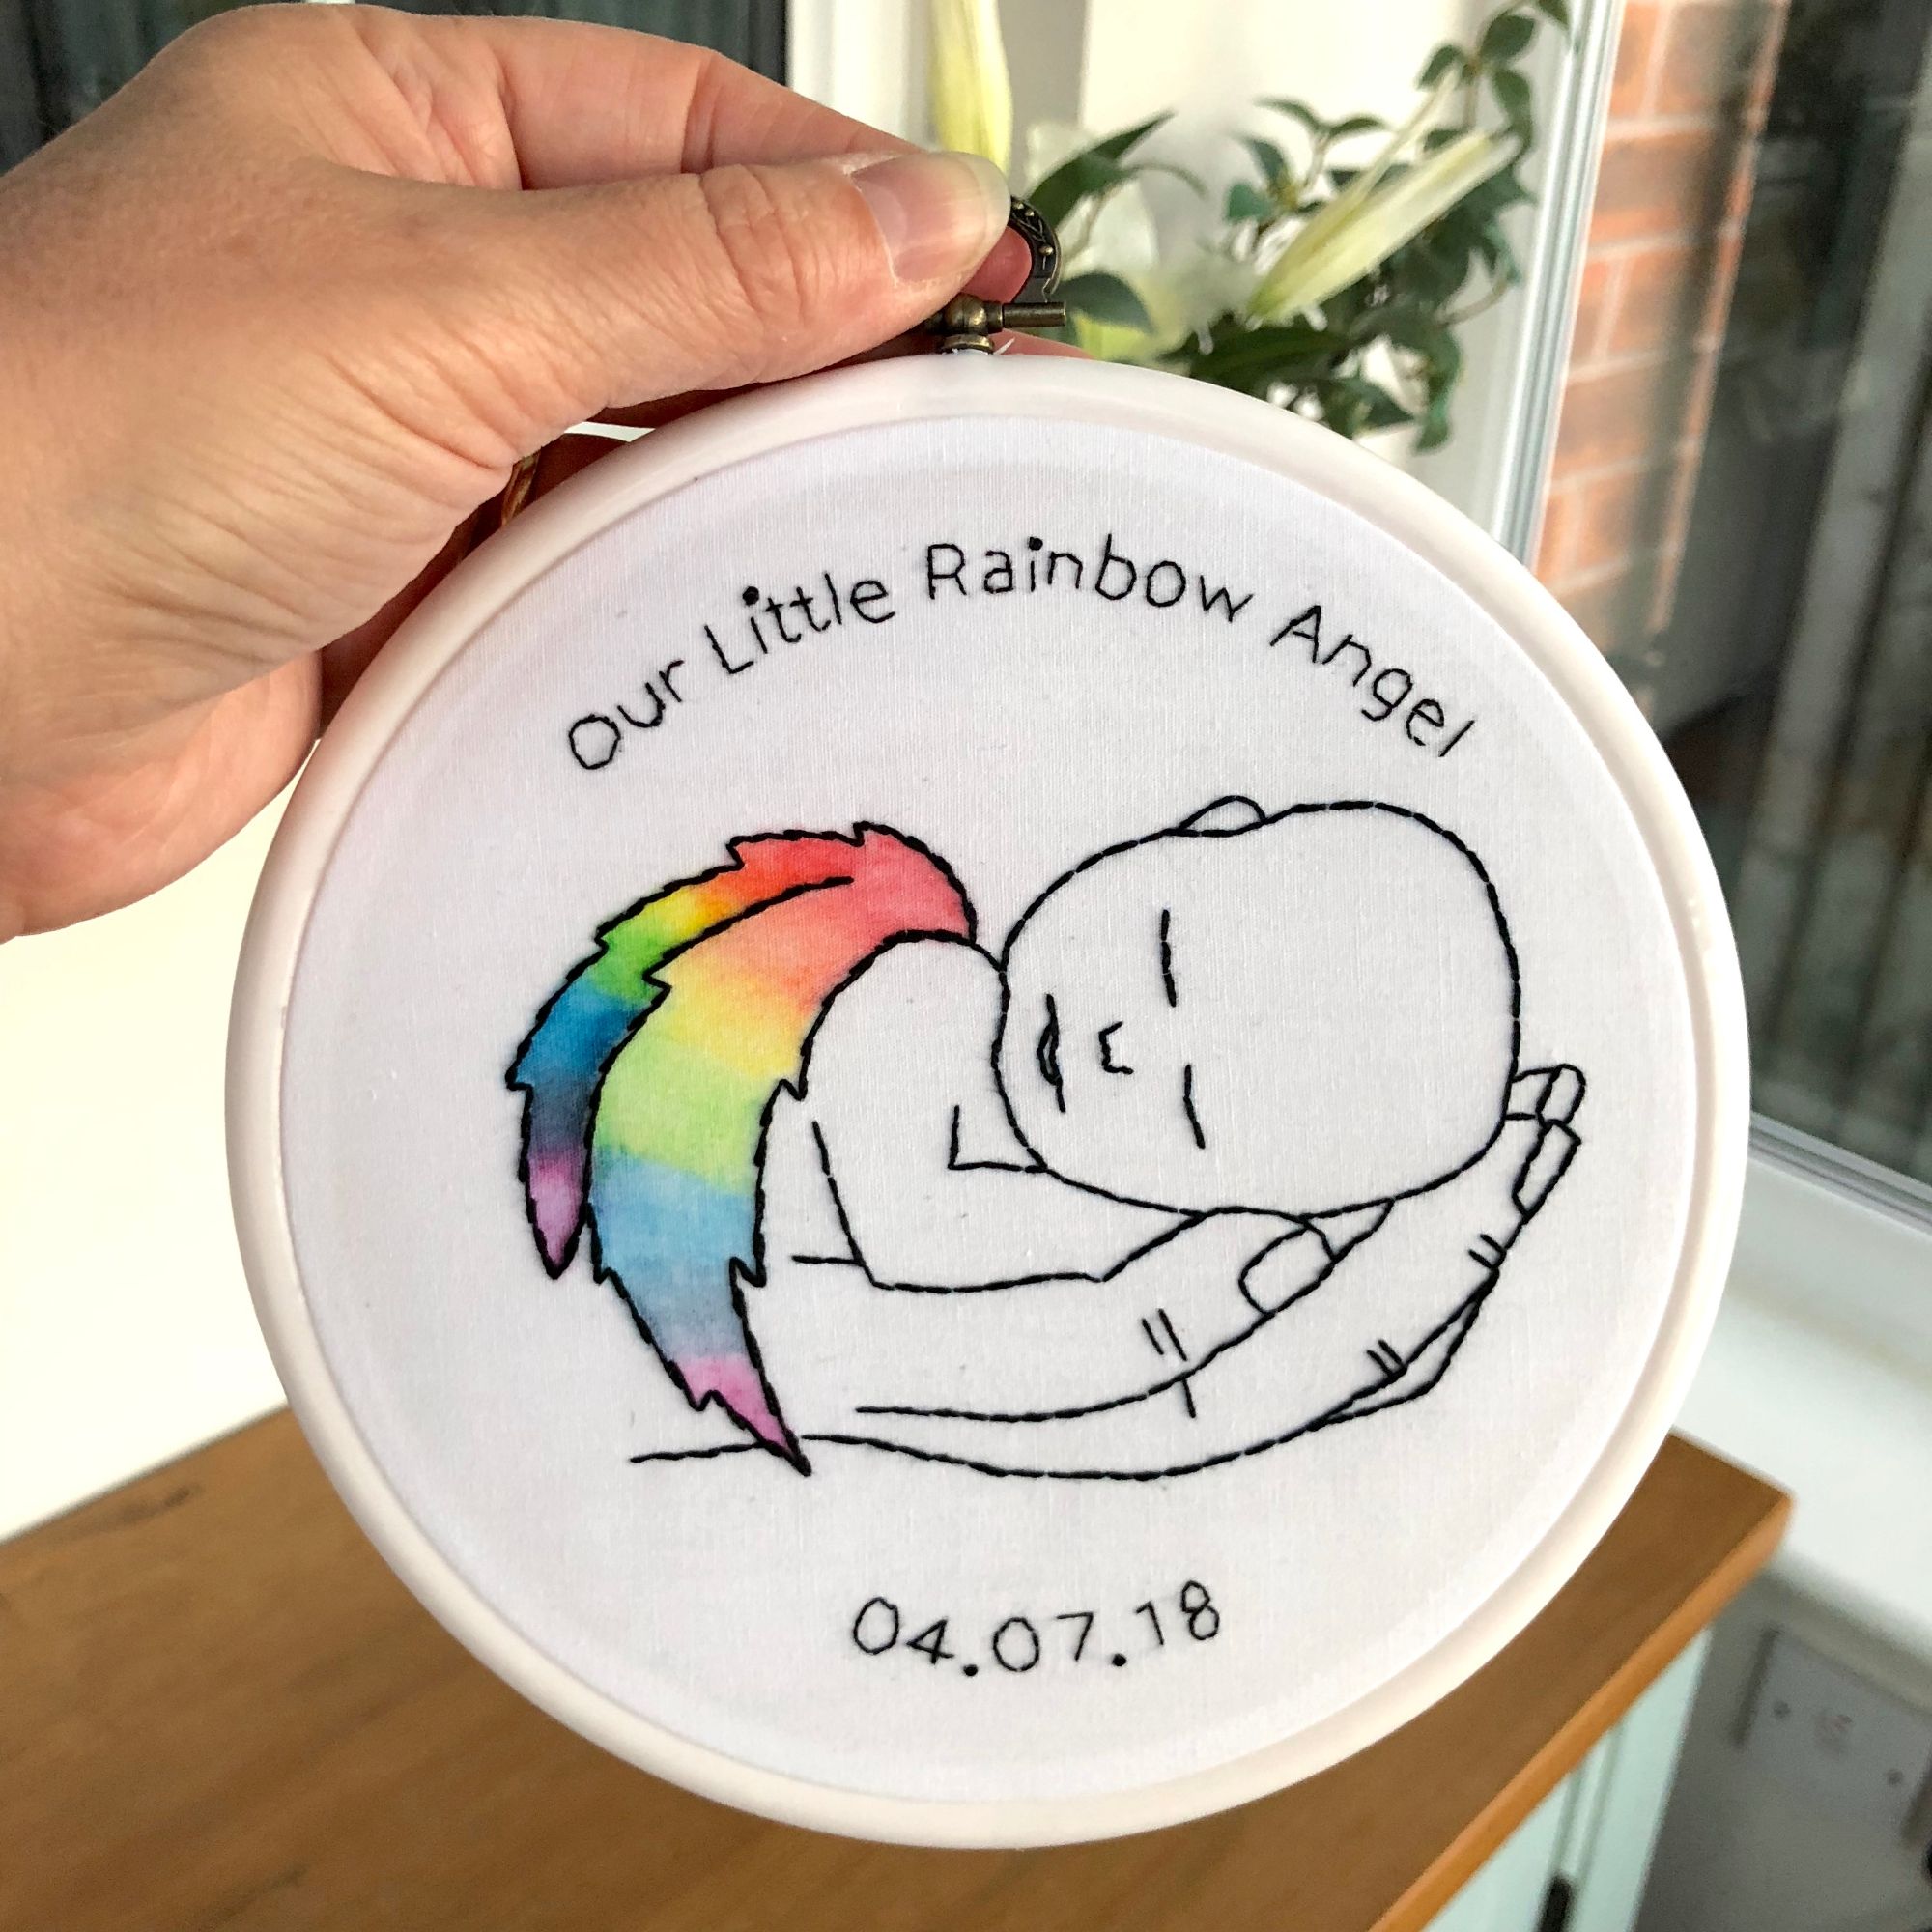 Raingbow Angel Baby	Embroidery	Handcrafted business	Just Sew Helen	Just Sew Helen Bereavement gifts & keepsakes	JustSewHelen.com	Memory gifts & keepsakes	Miscarriage	Remembrance gifts	Thread painting	Twin angels